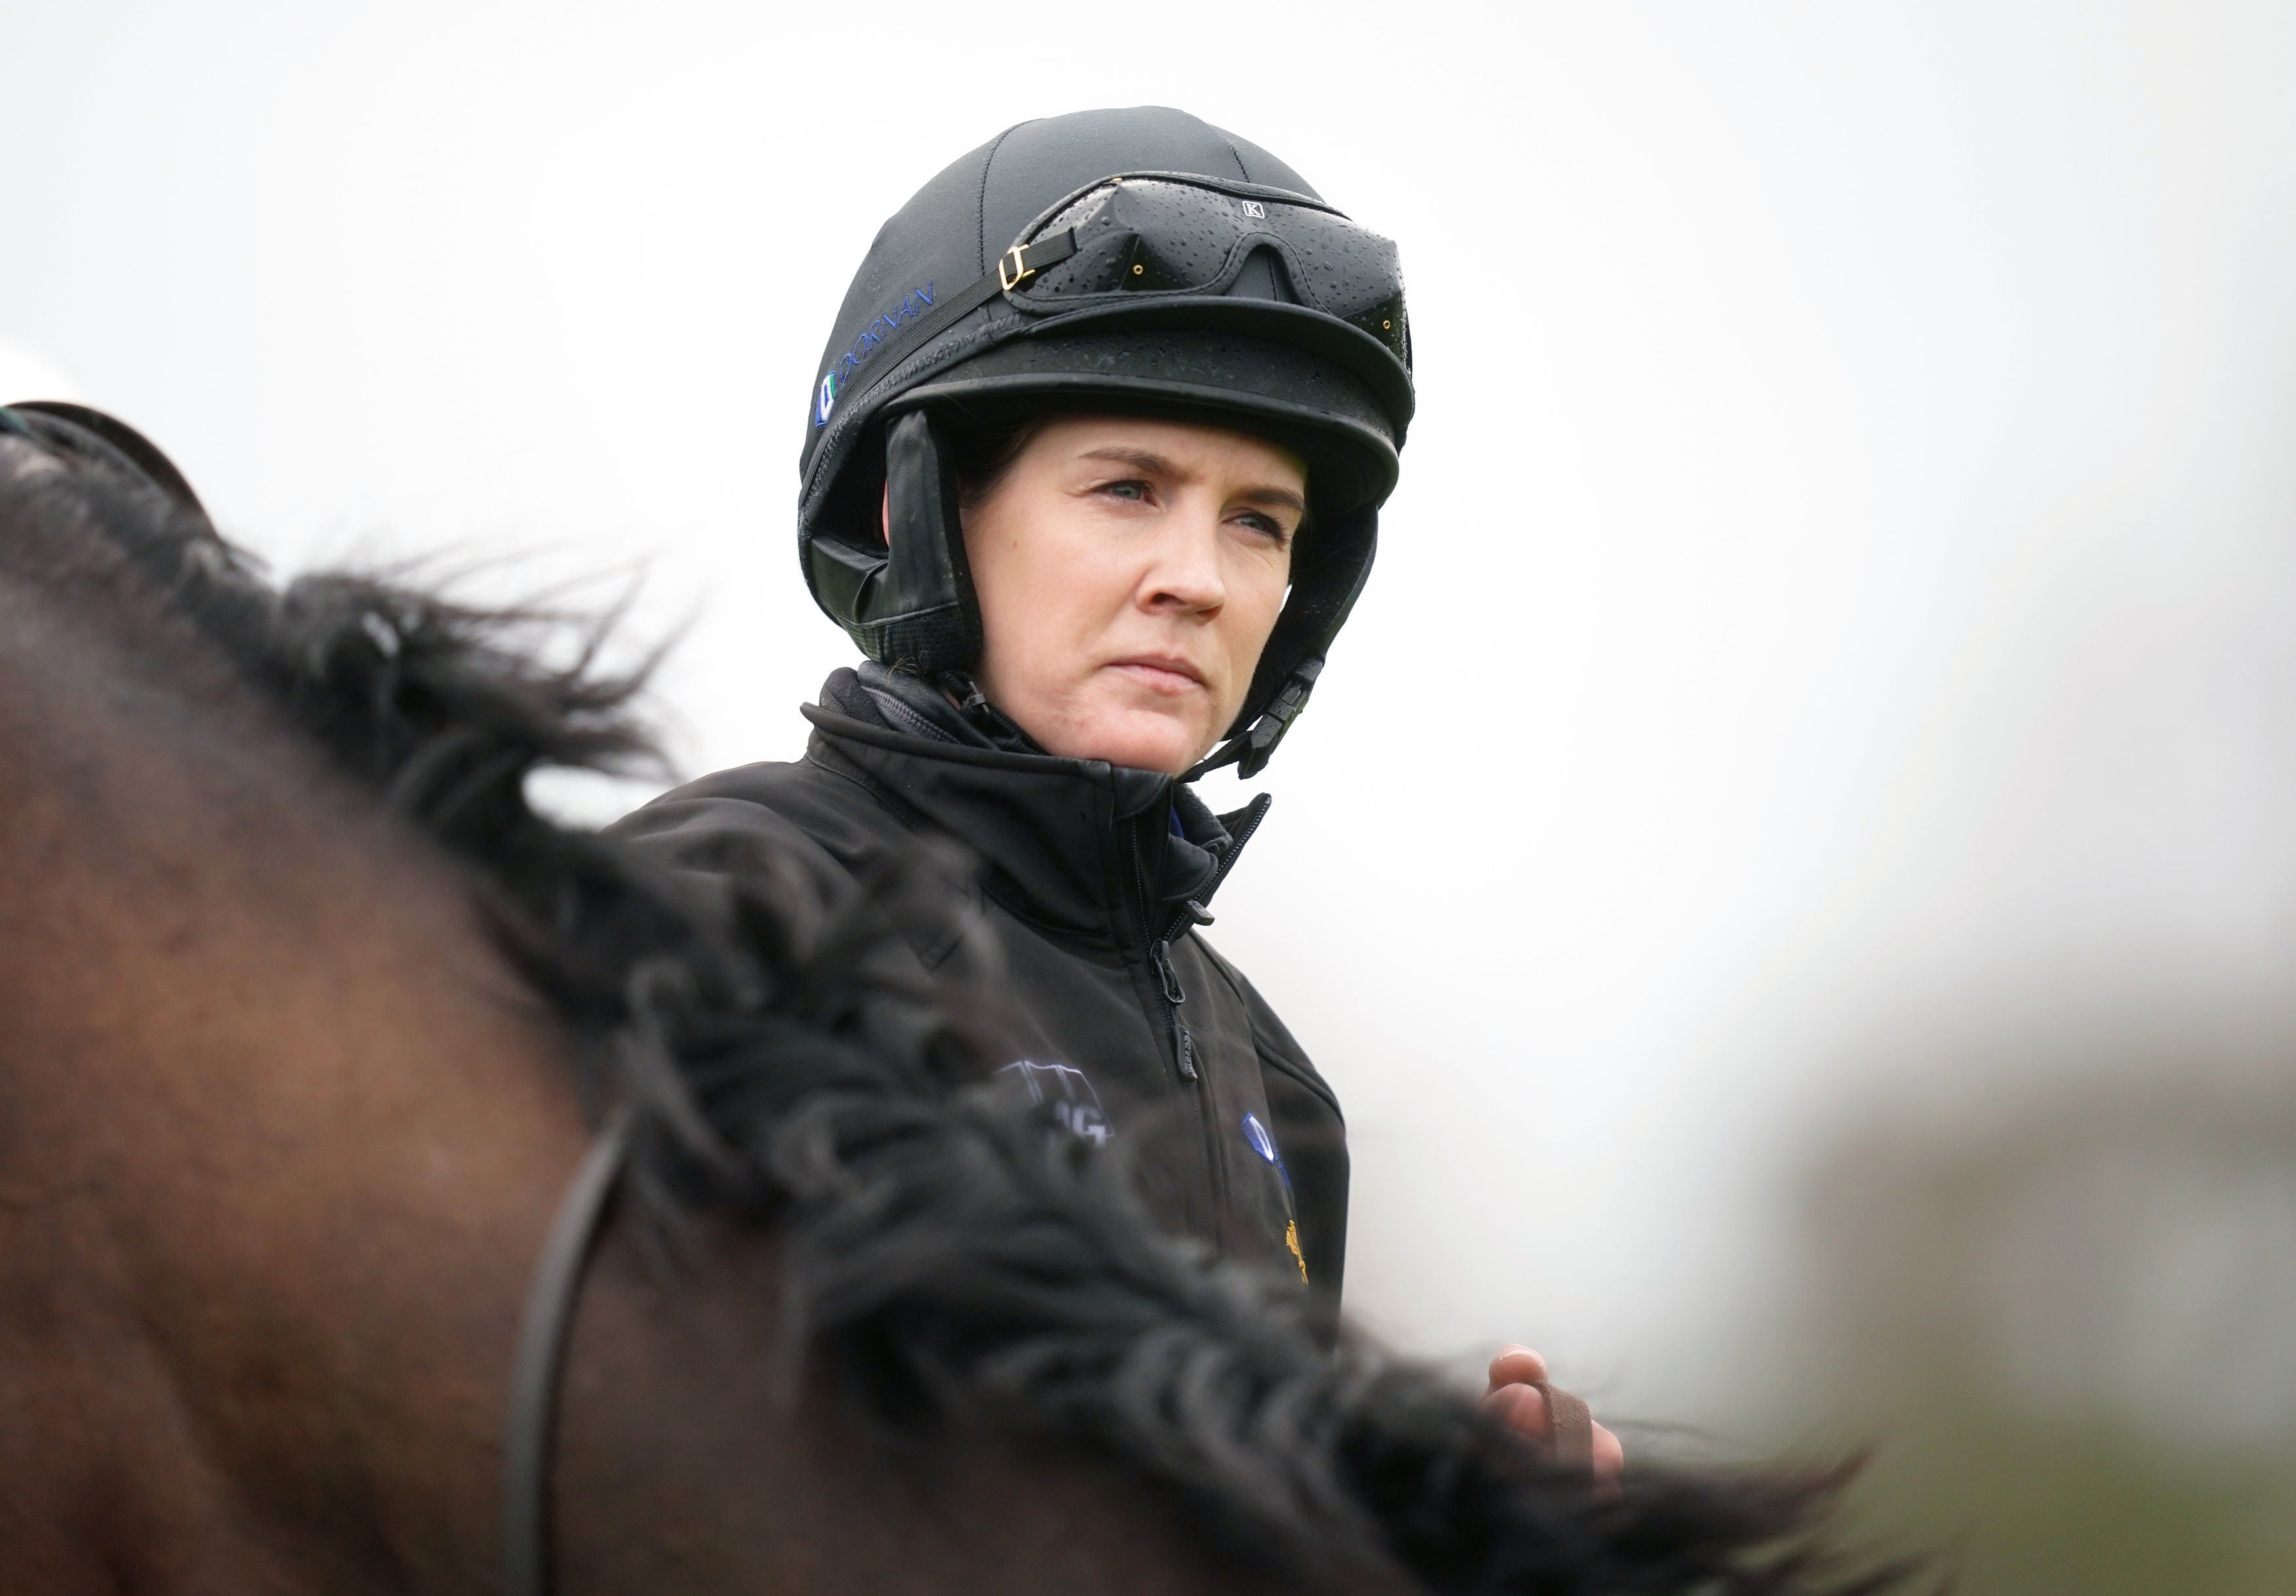 The first female jockey to win the Cheltenham Gold Cup, Rachael Blackmore will fancy her chances at the festival this week